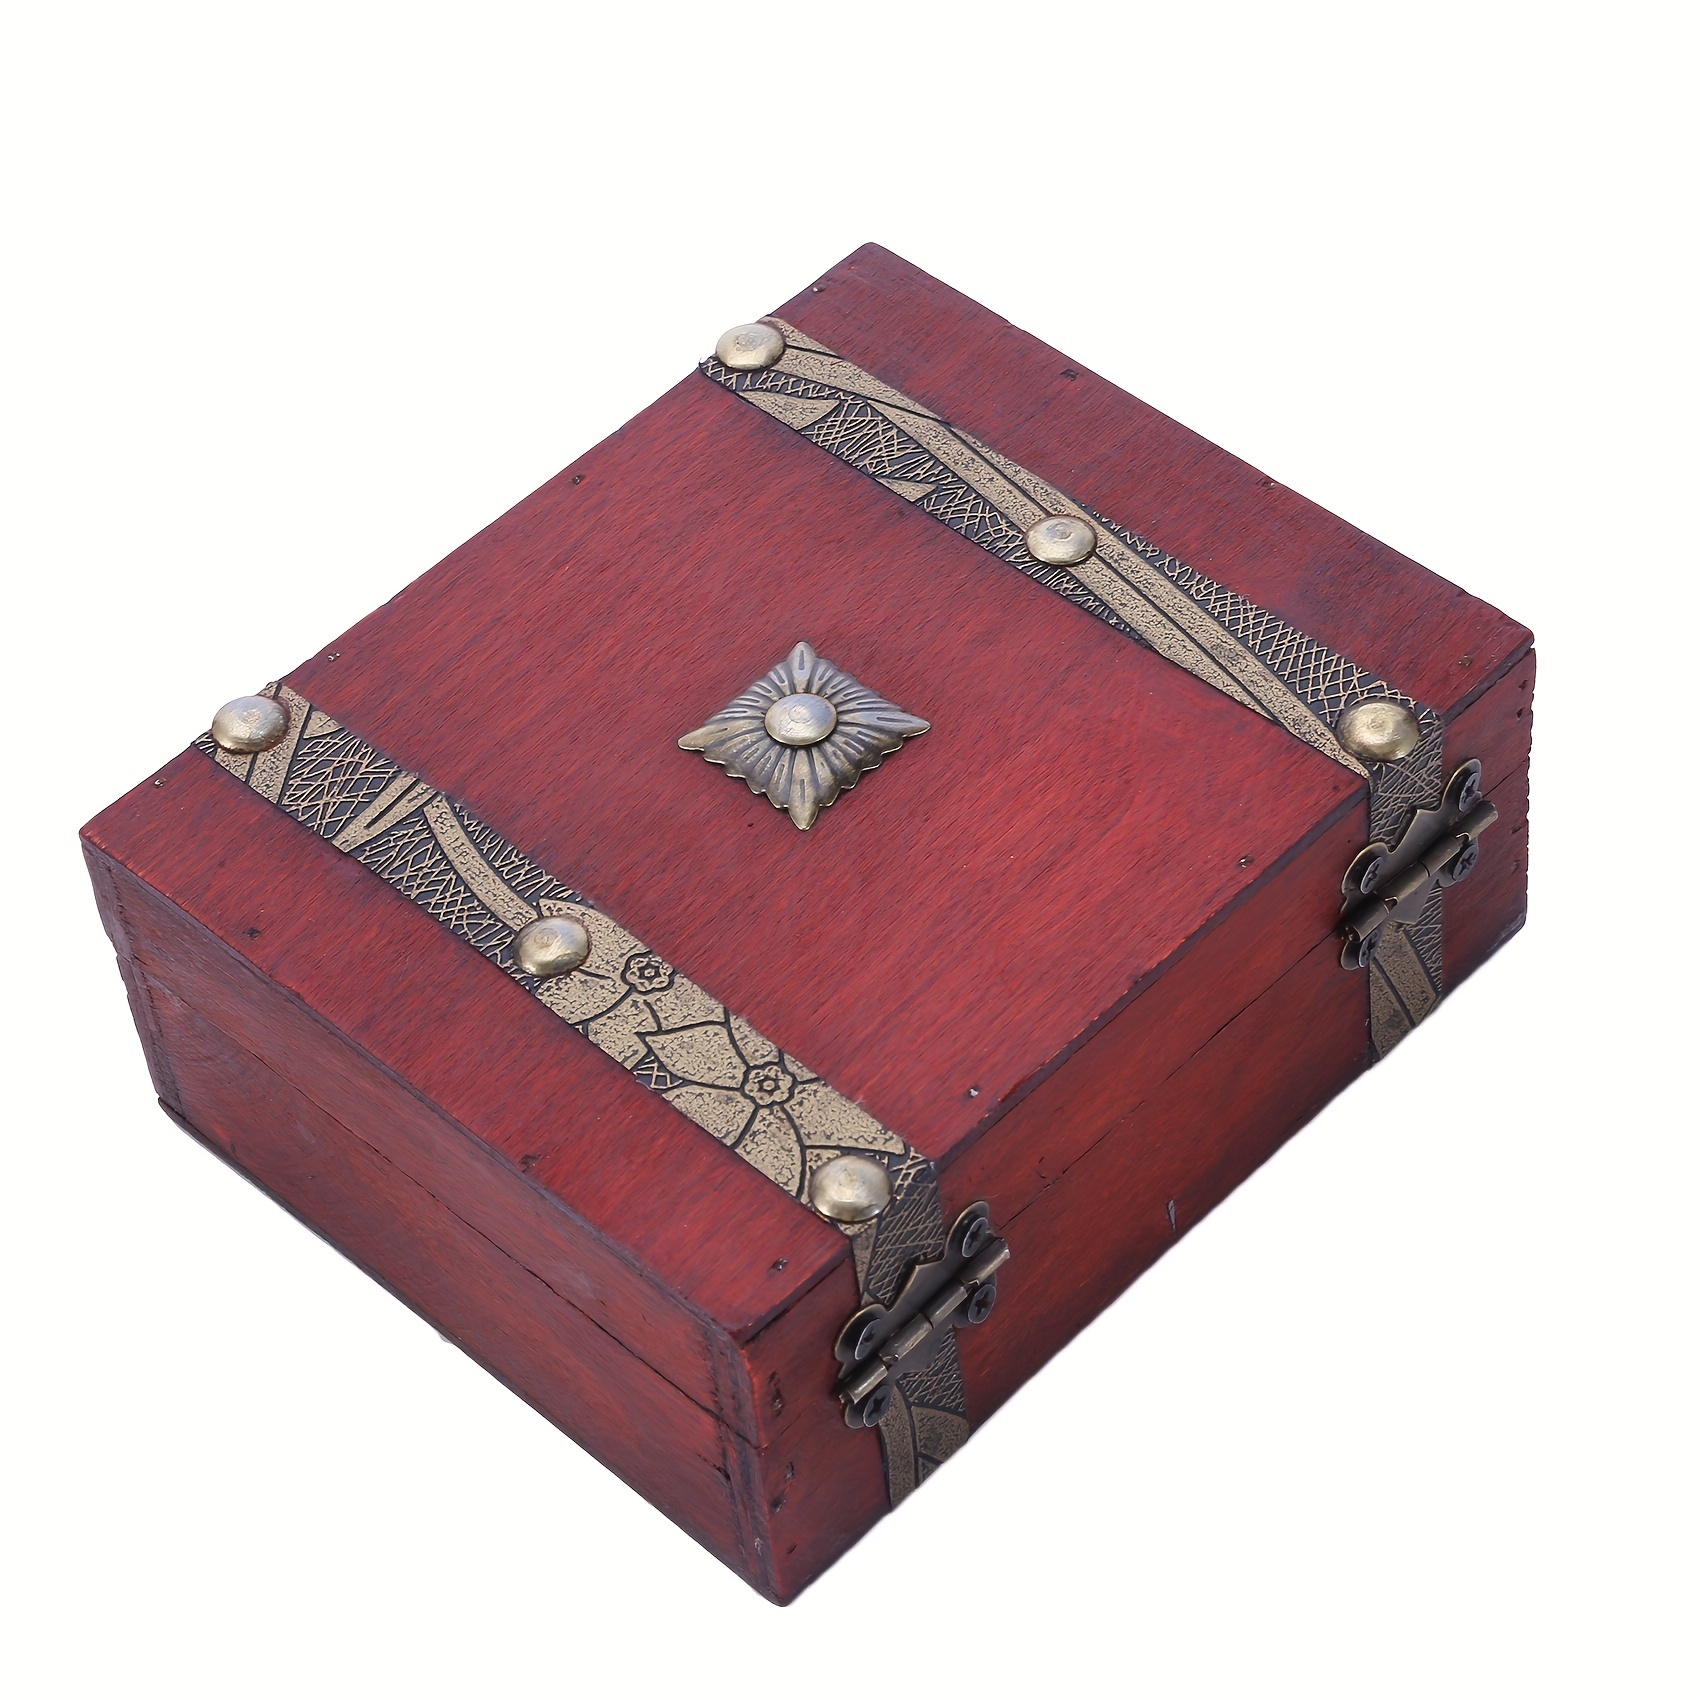 Lockable Large Pirate Treasure Wooden Chest /extra Large Antique Chest With  Lock / Wedding Box With Lock / Rustic Memory Chest -  Canada